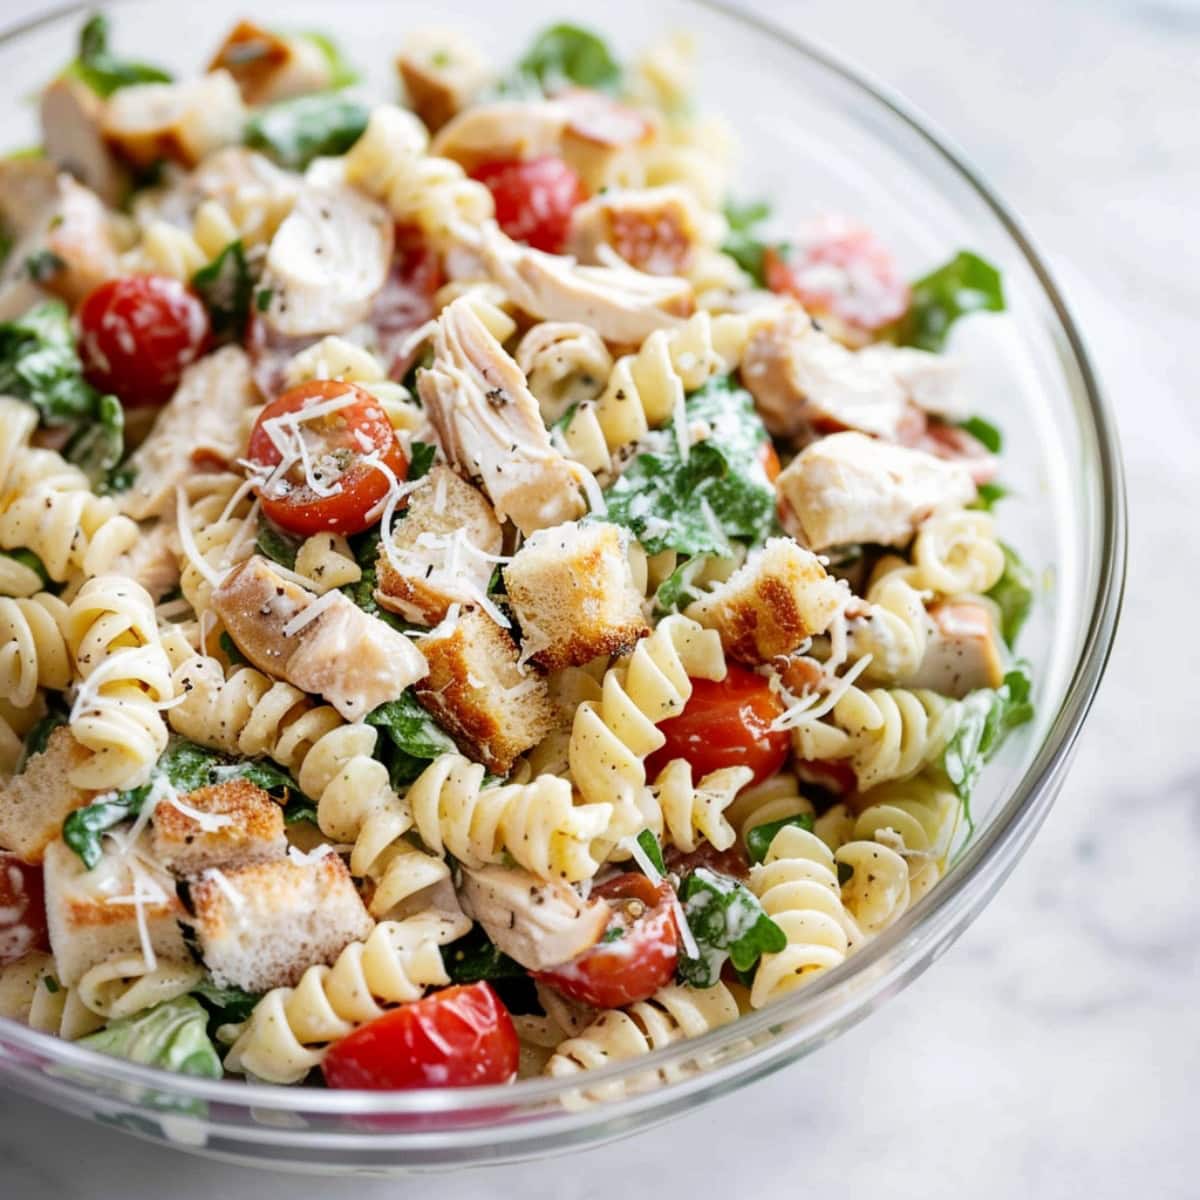 An appetizing pasta salad with a colorful mix of romaine lettuce, cherry tomatoes, grilled chicken, and flavorful Caesar dressing.